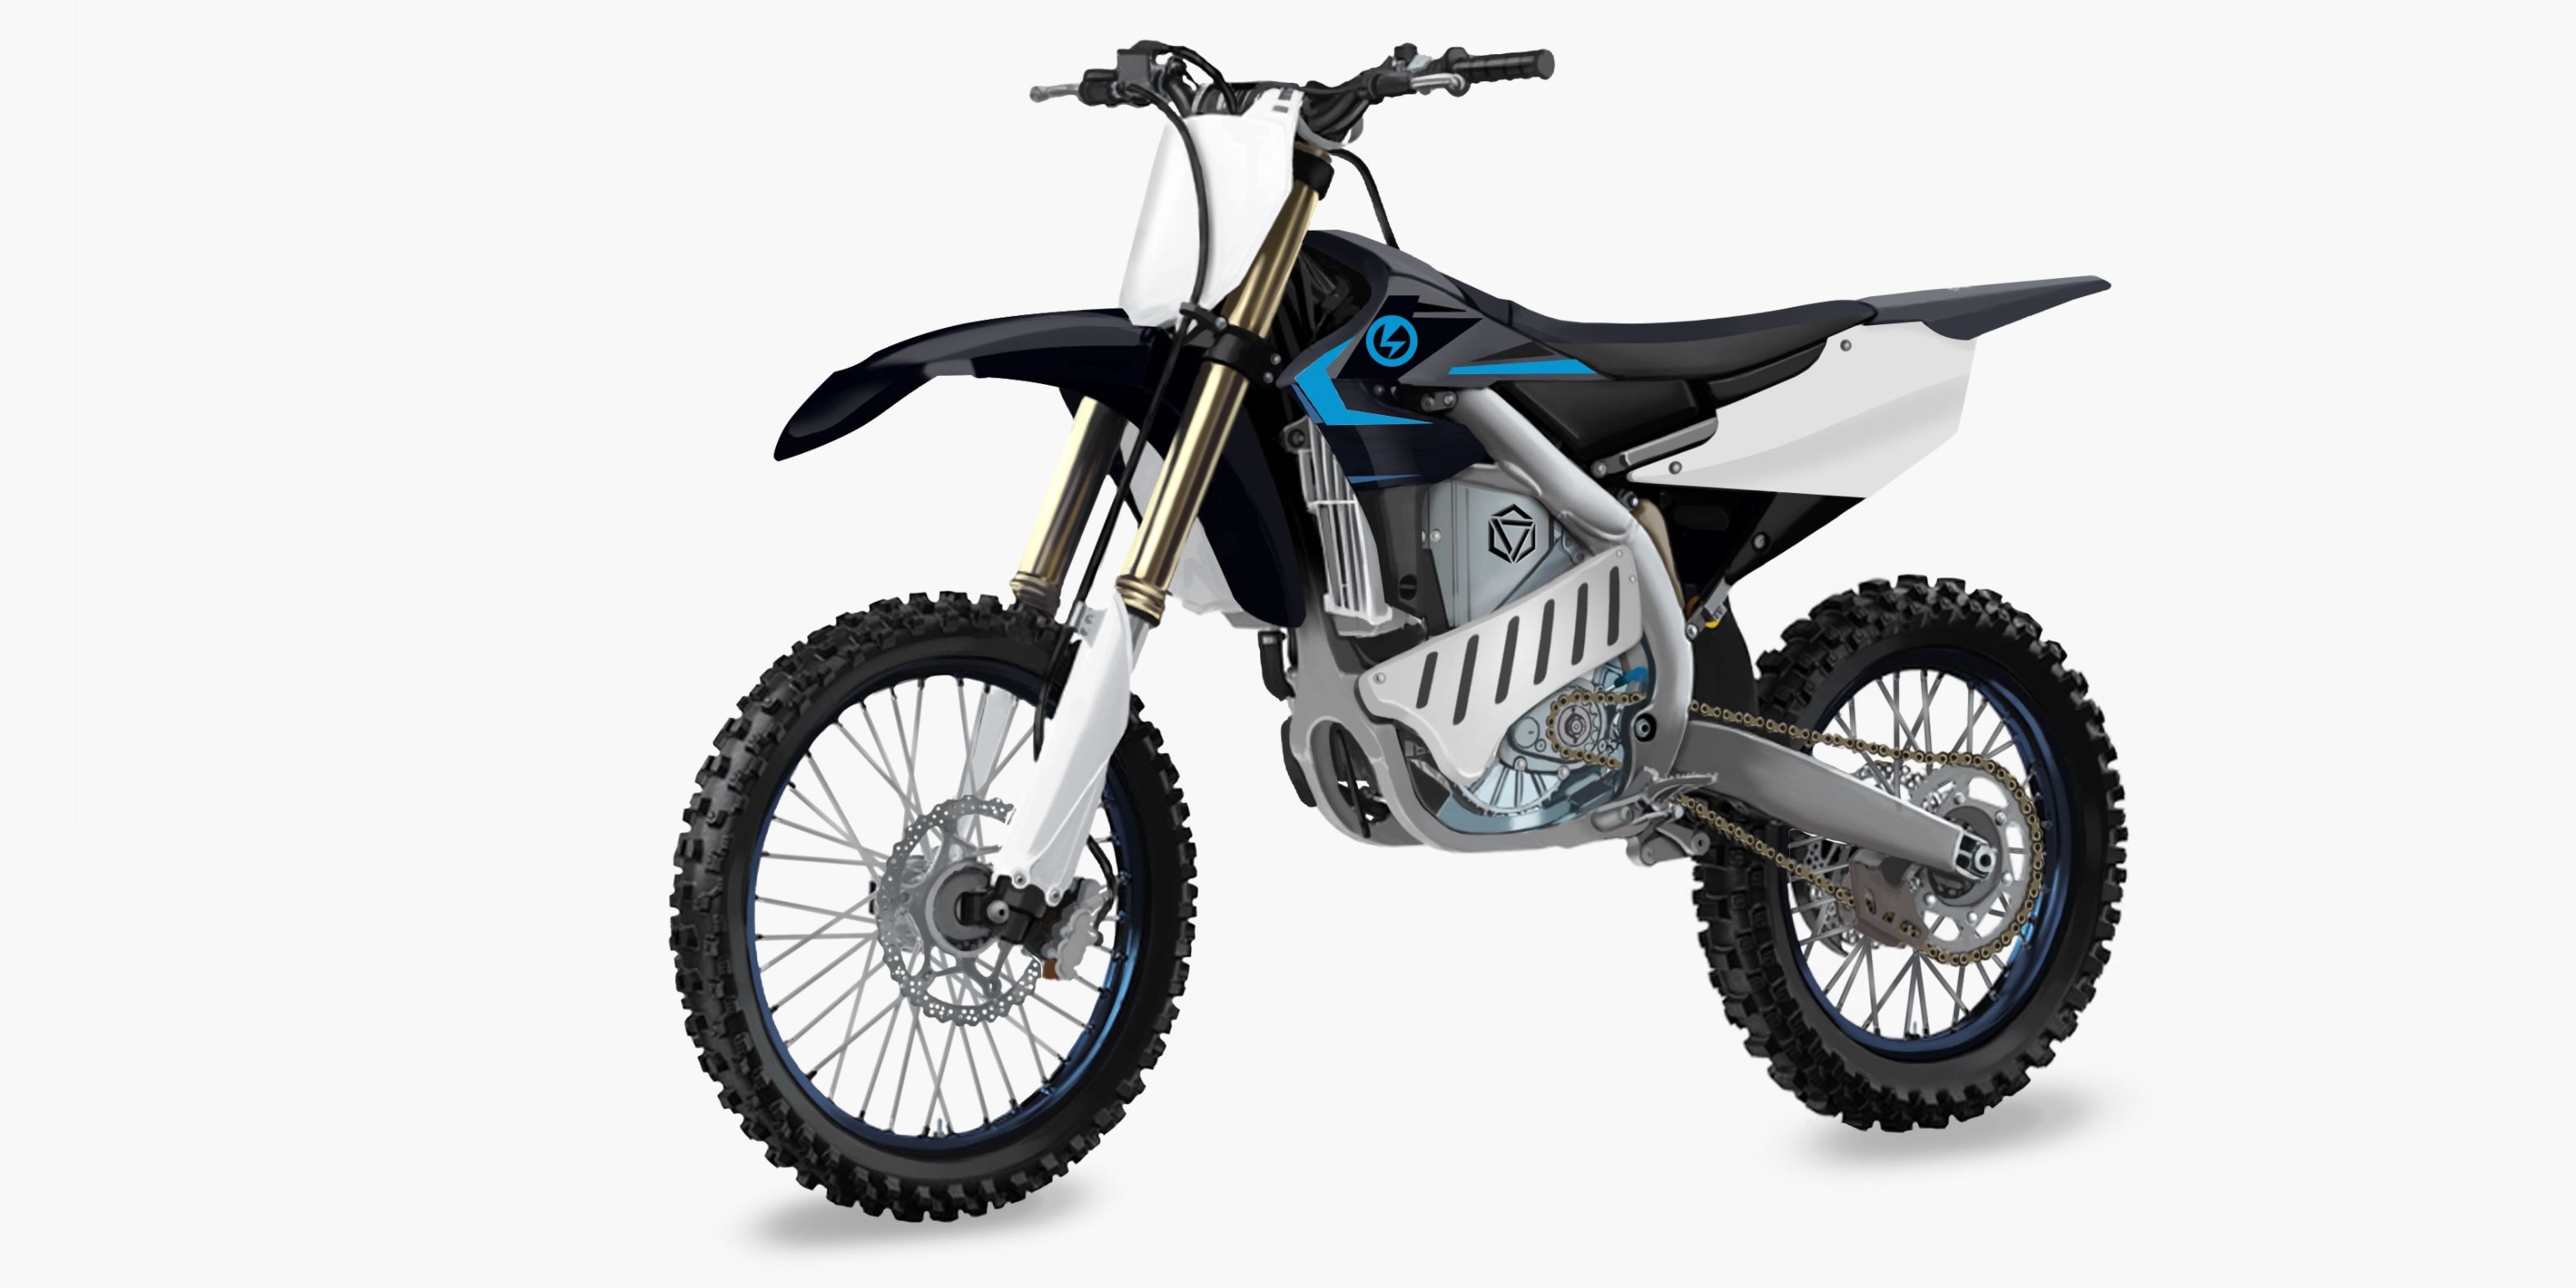 New electric dirt bike unveiled 